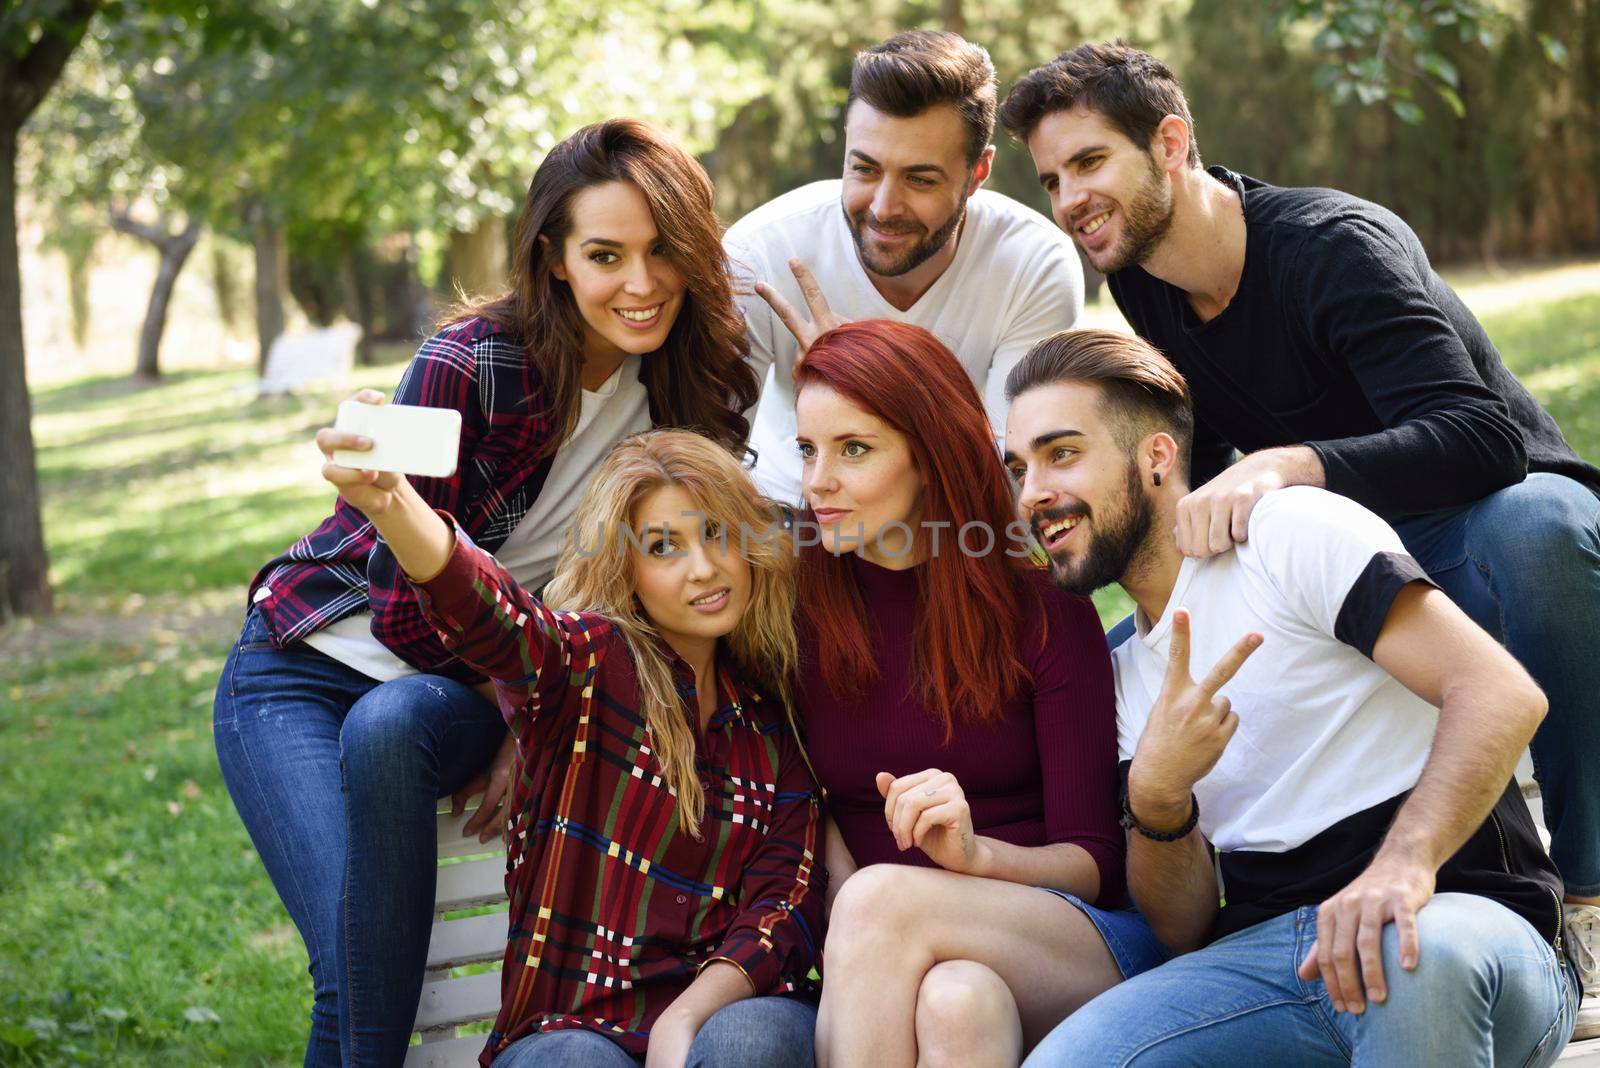 Group of friends taking selfie in urban park. Five young people wearing casual clothes.